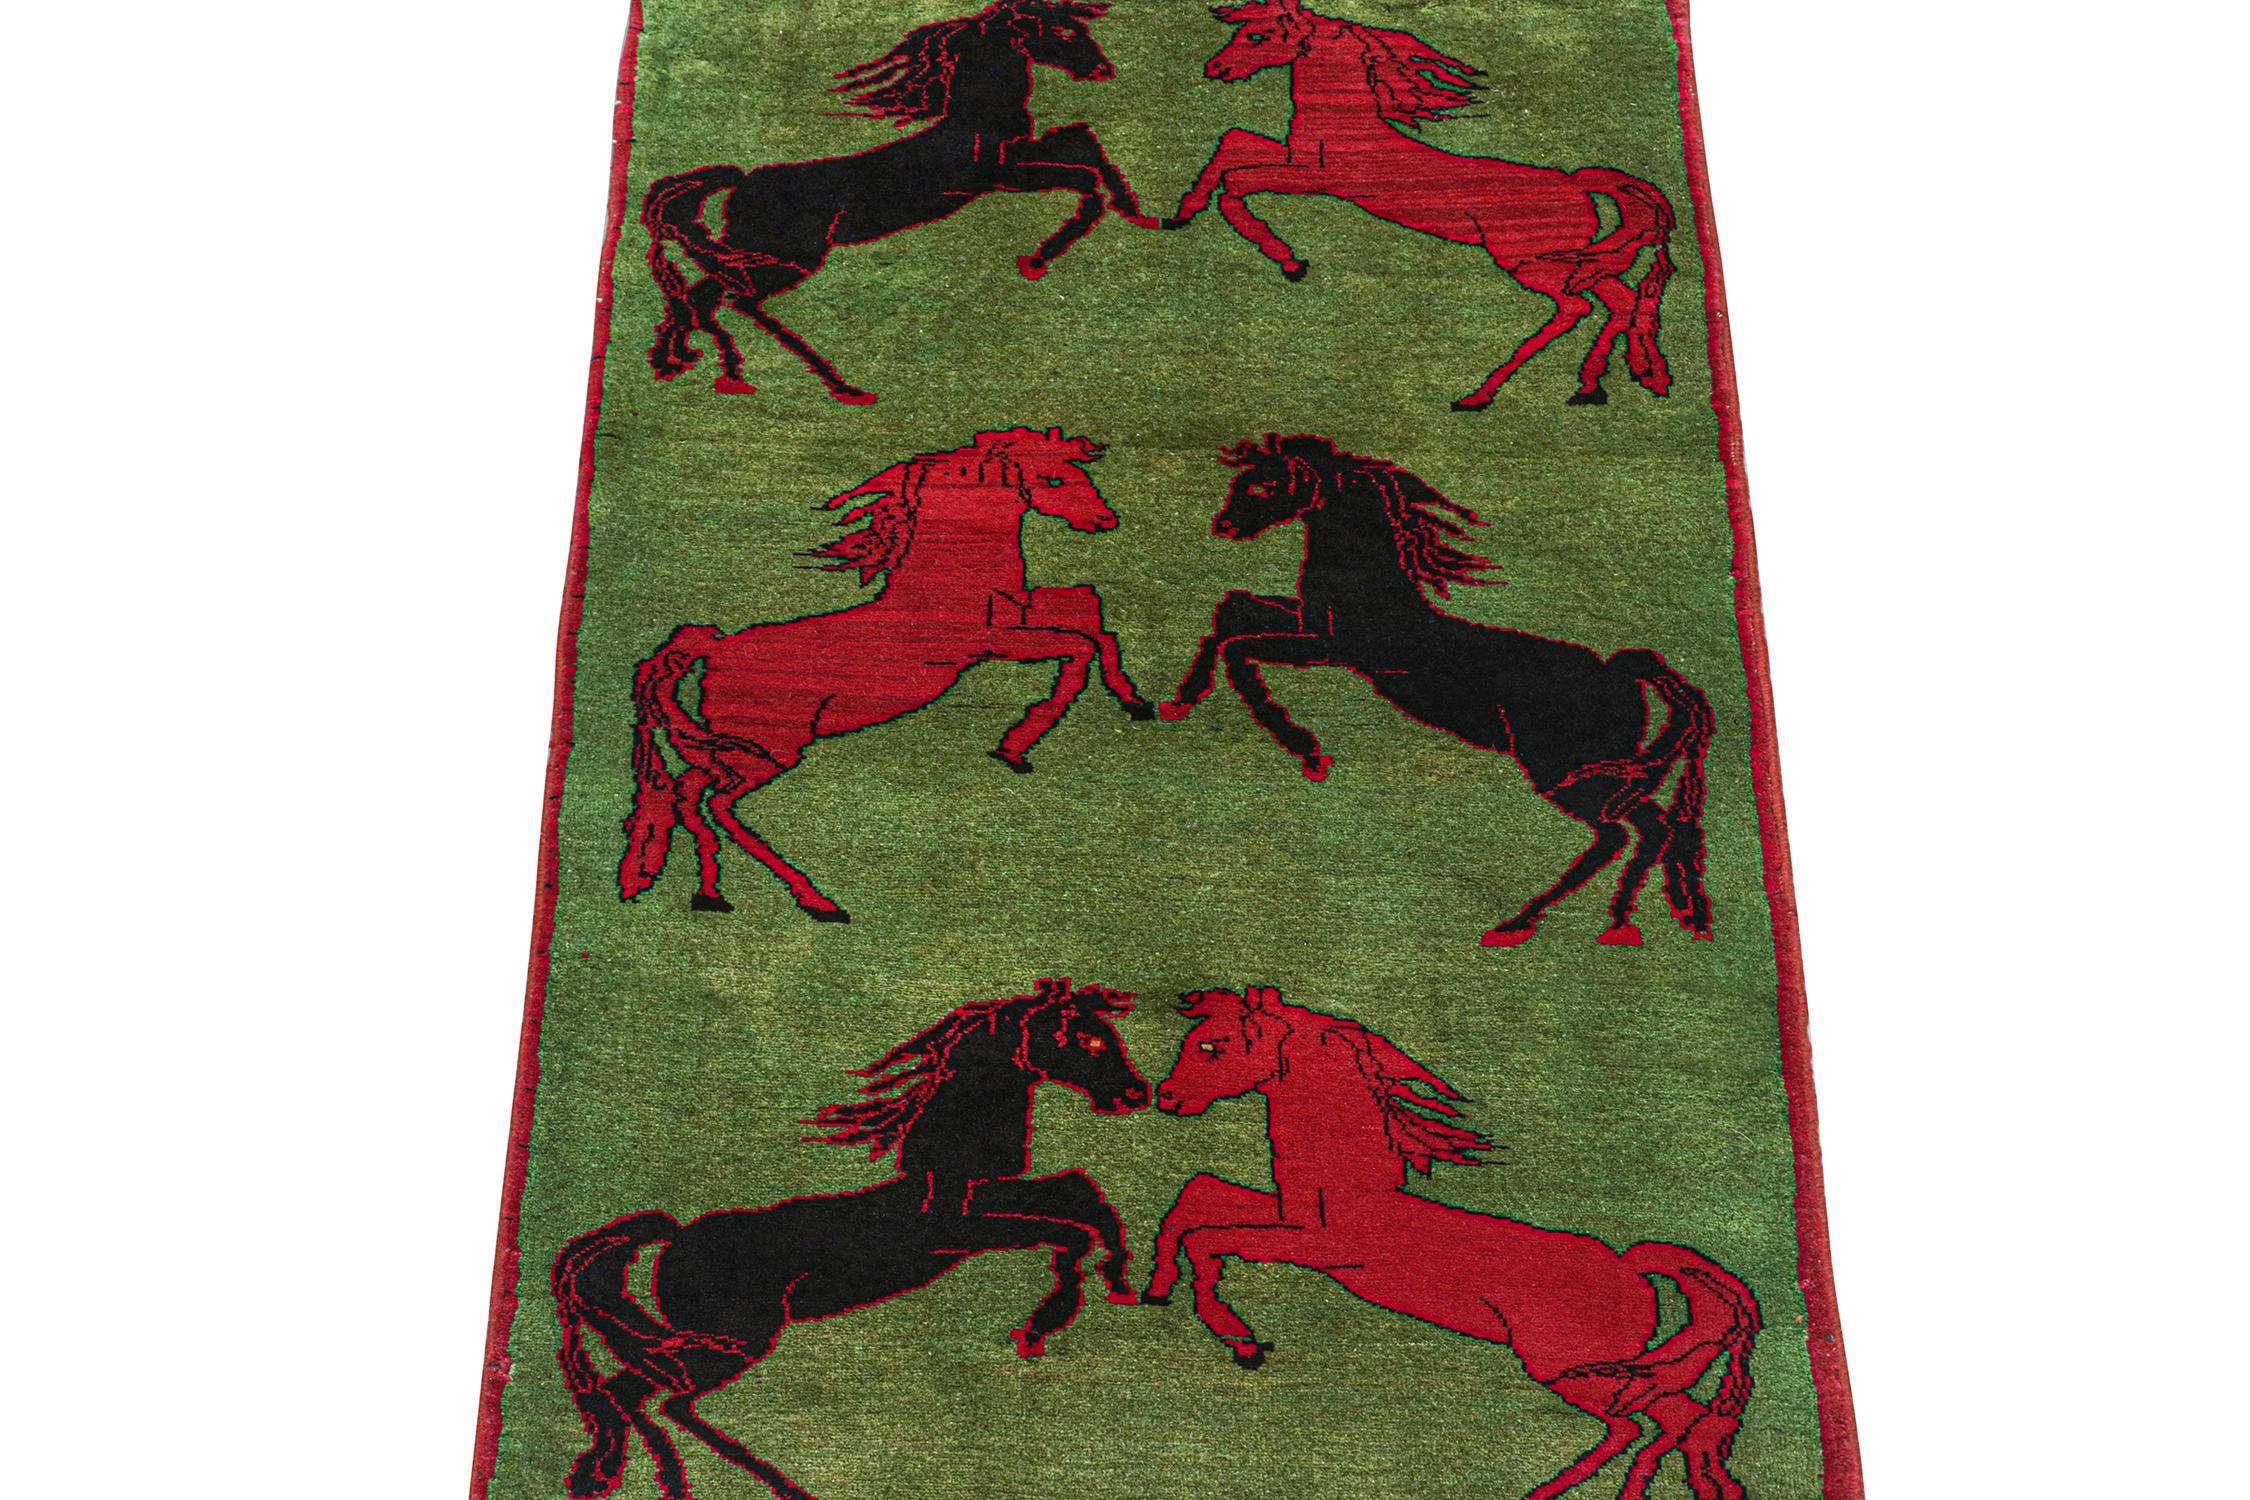 This vintage 3x5 Persian rug is a rare tribal piece, hand-knotted in wool circa 1950-1960.

On the Design: 

The design enjoys a green field with six pictorial patterns that depict horses in black and red hues. Connoisseurs will further admire this